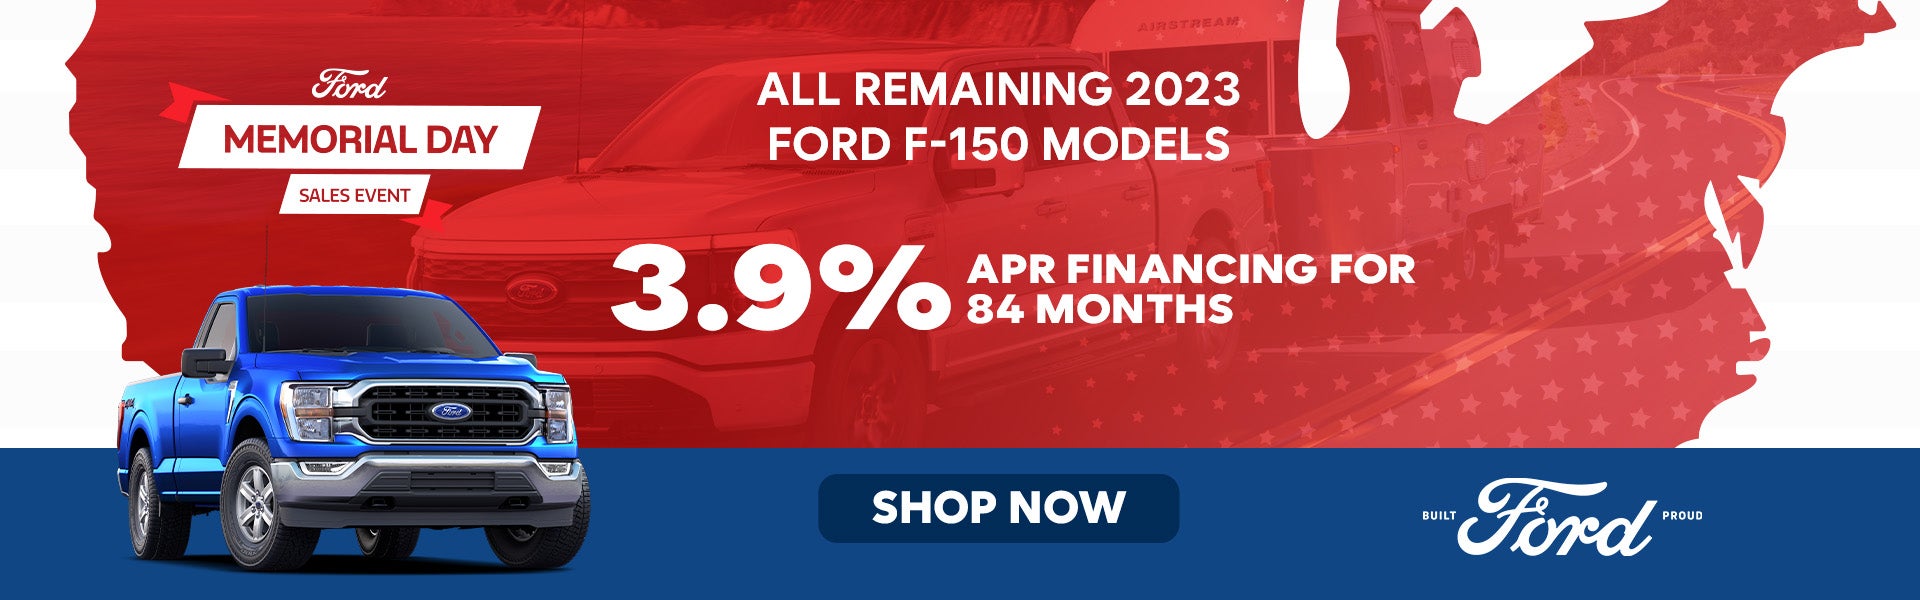 Save on New 2023 Ford F-150